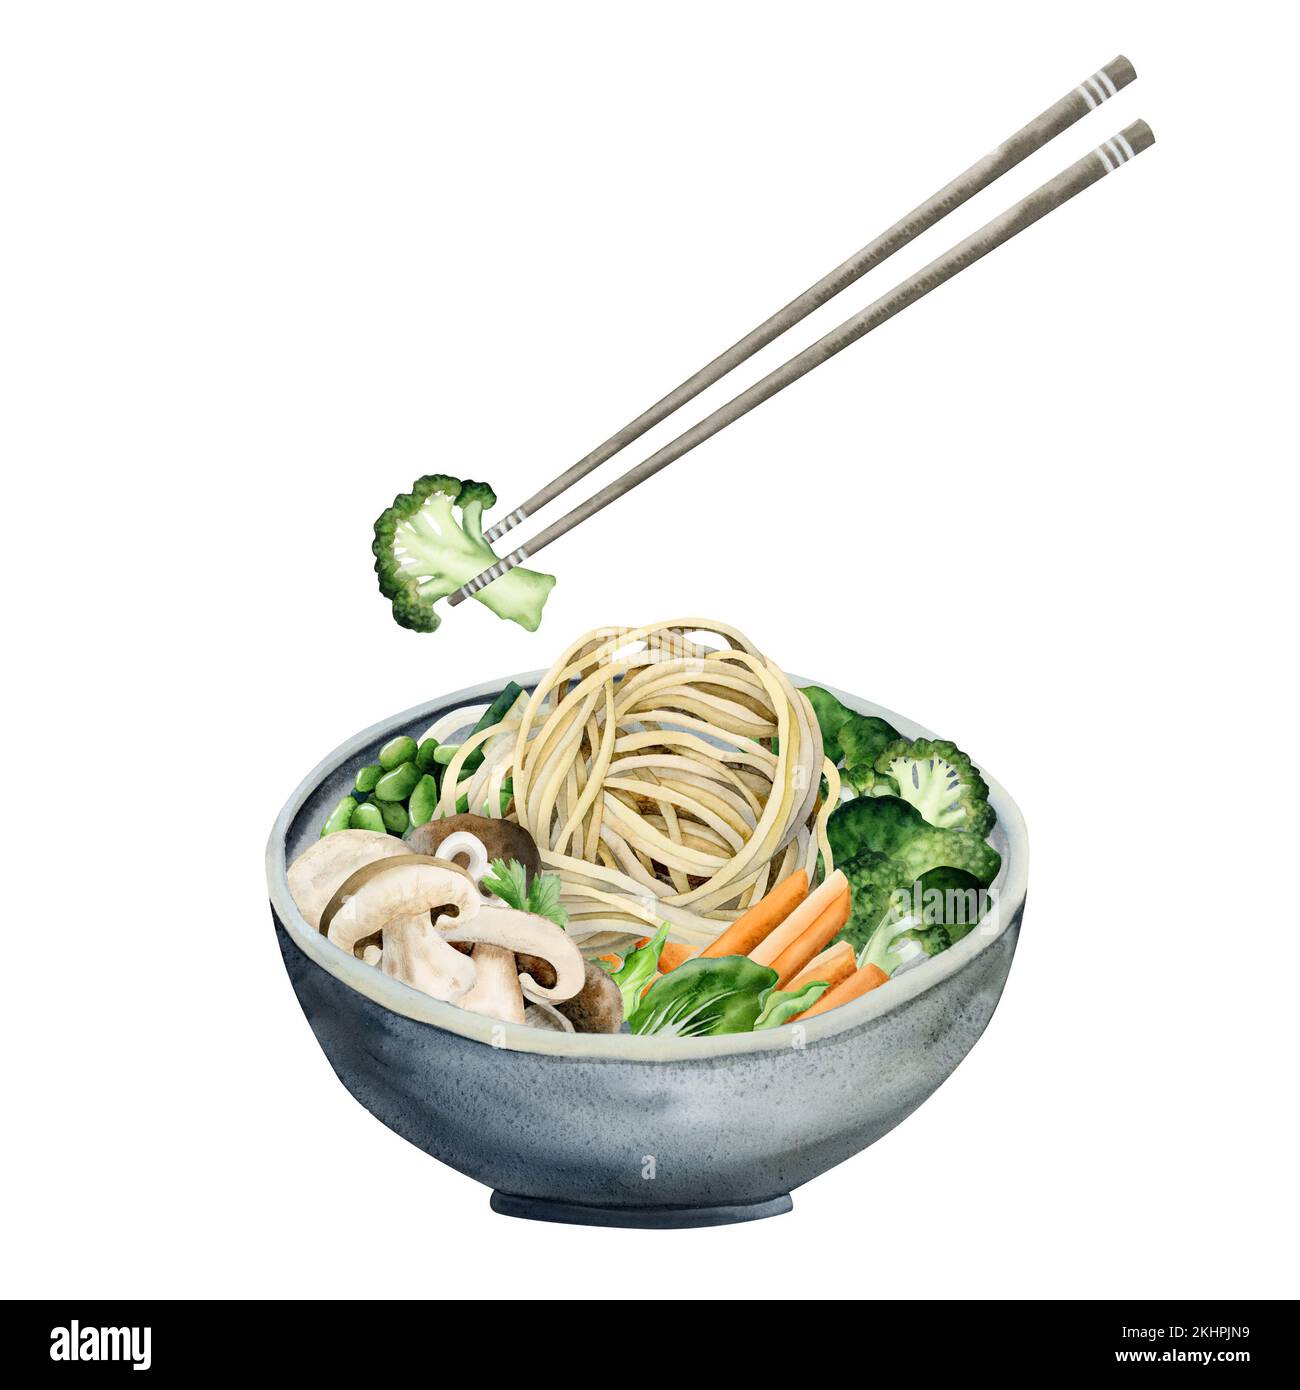 Bowl with Chinese noodles and vegetables watercolor illustration. Food chopsticks with Asian meal, broccoli, mushrooms, carrot, beans Stock Photo